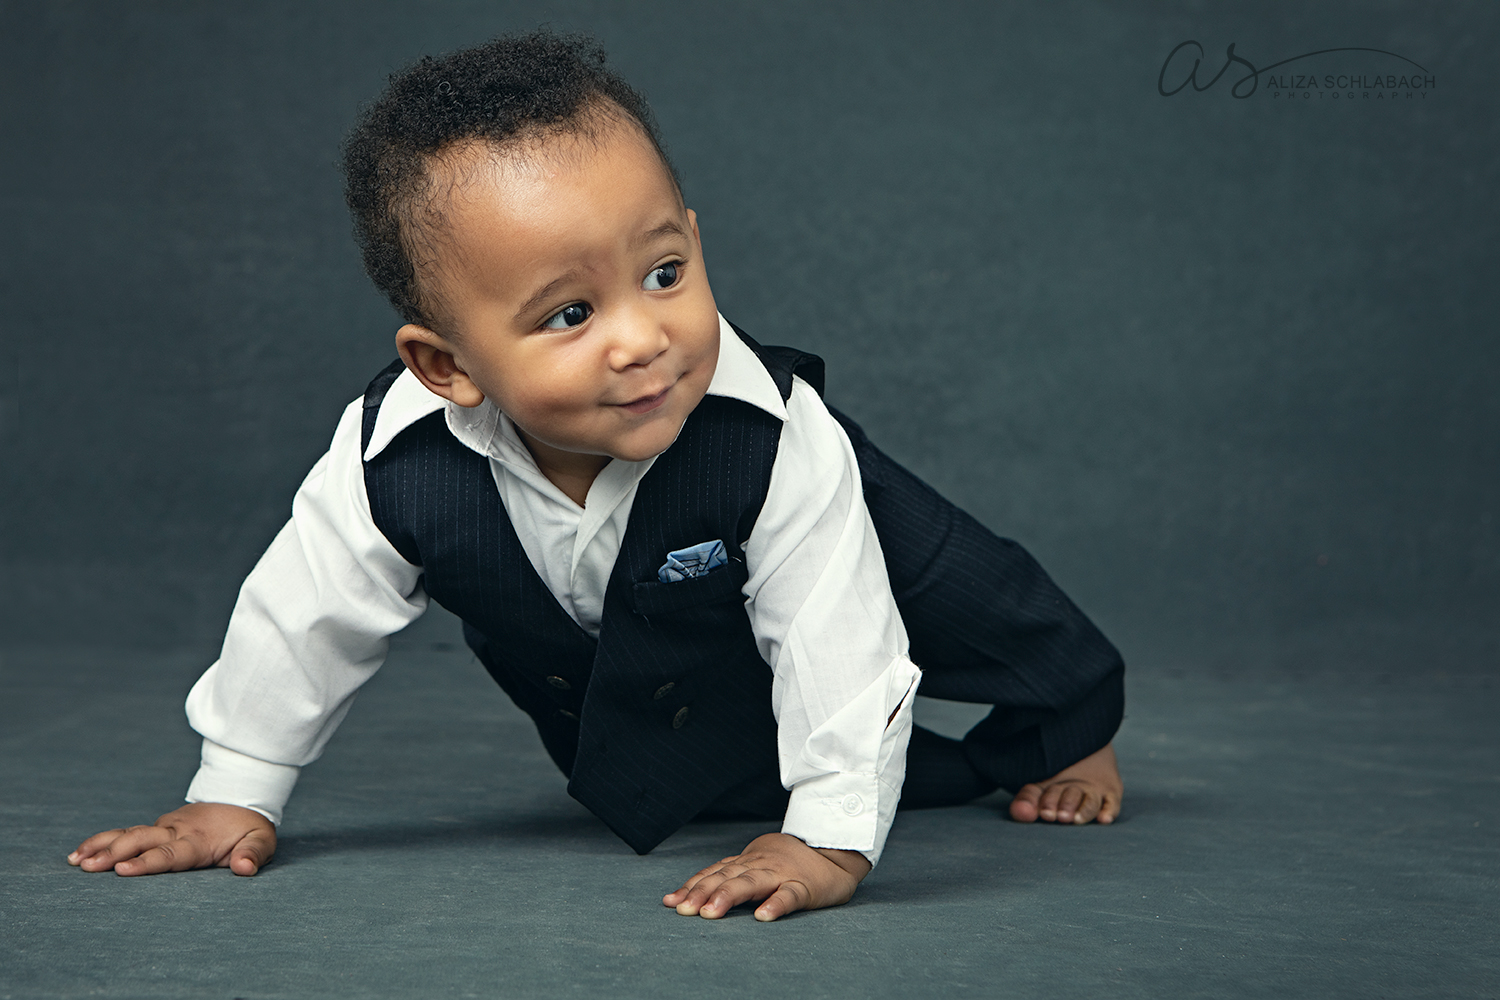 Portrait of a cute black baby crawling in a suit